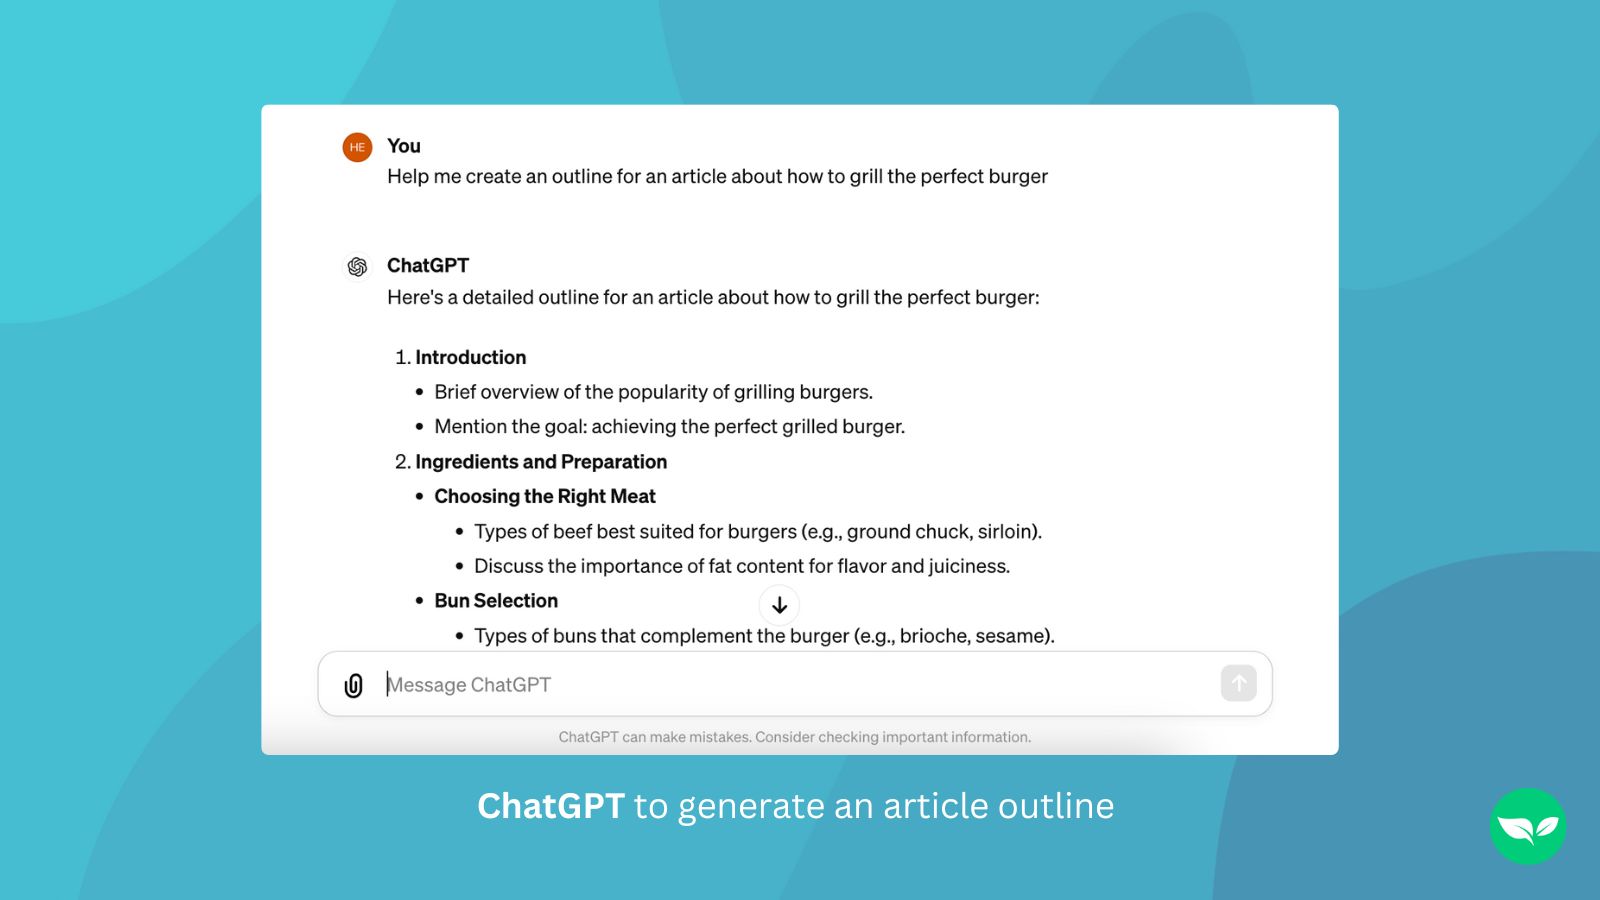 A screenshot showing ChatGPT being used to create an outline for an article.